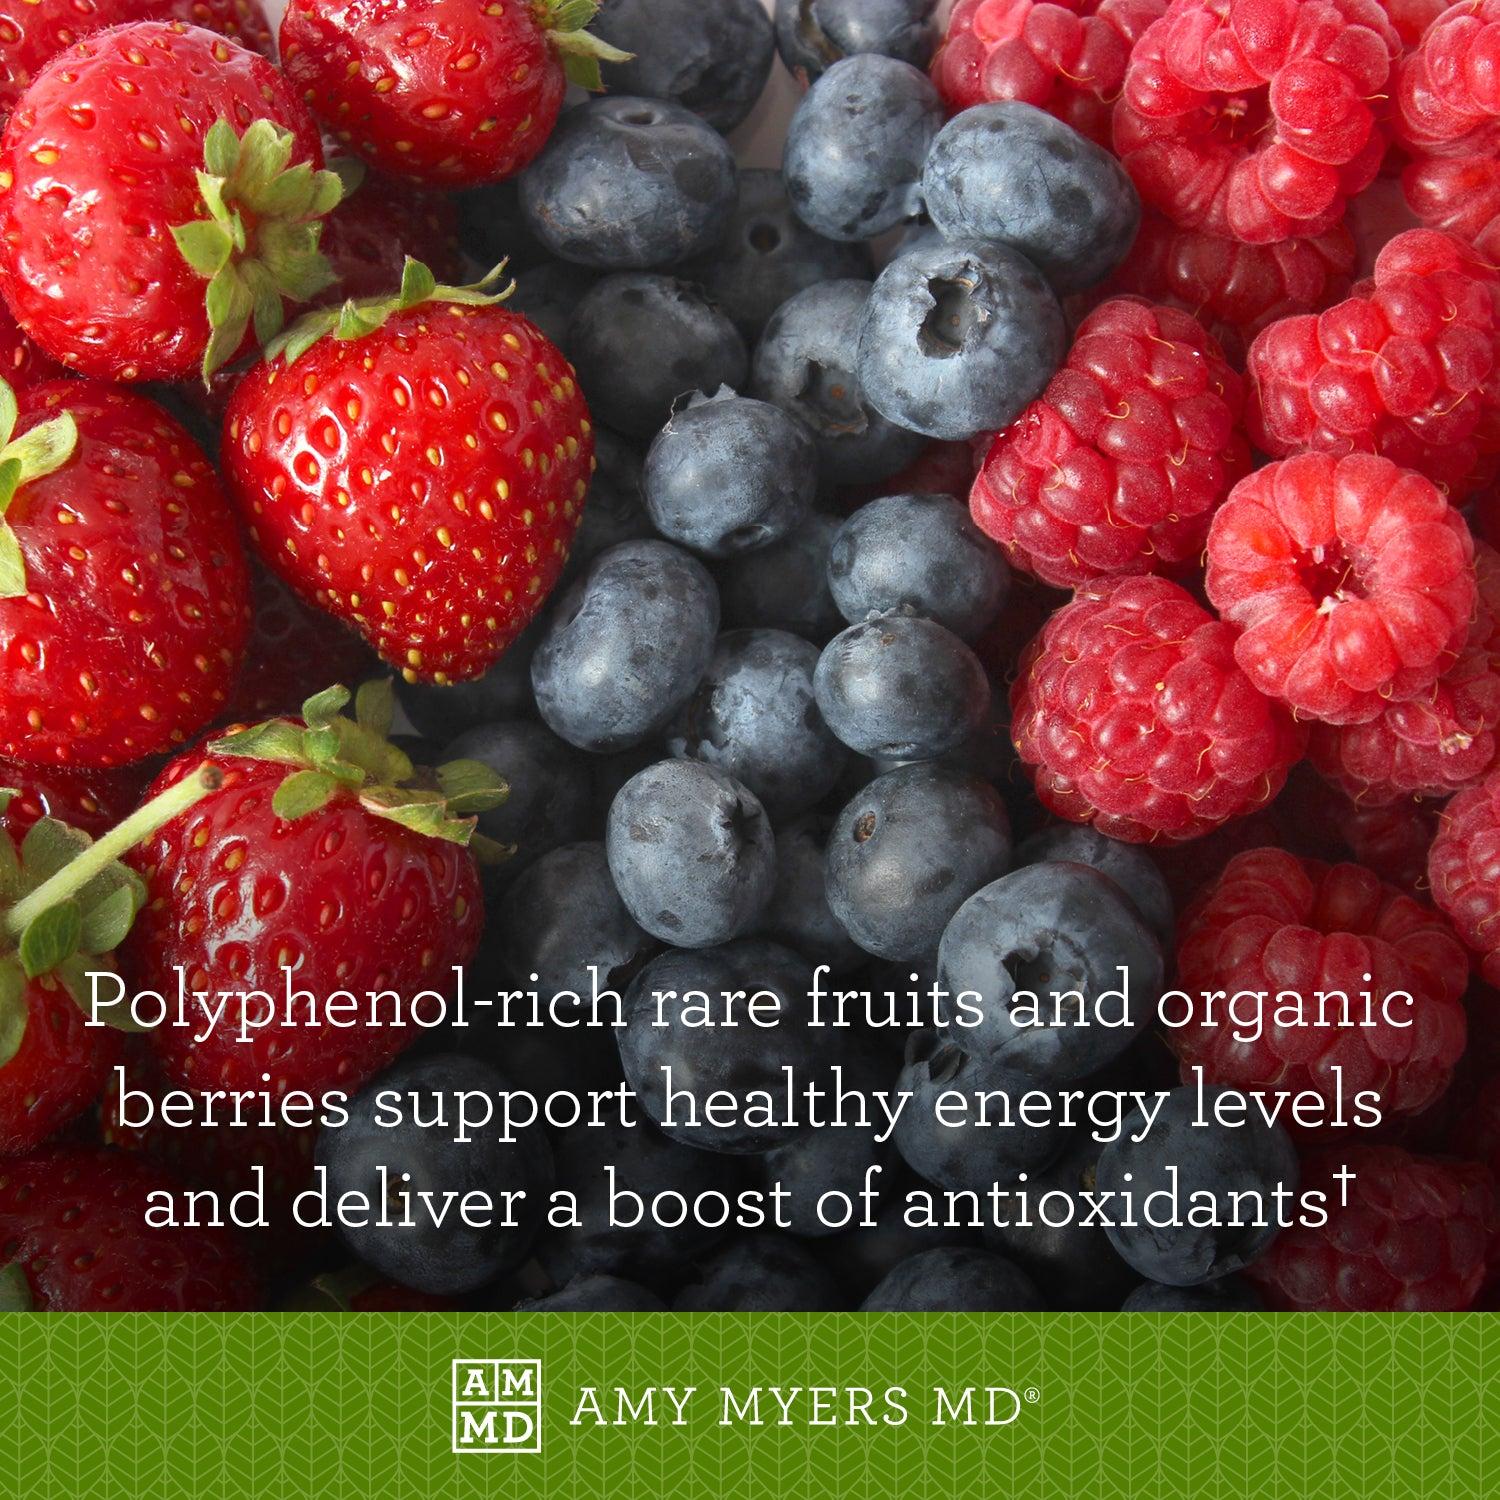 Best Day Ever Pack - Organic Reds Benefits - Blueberries and Raspberries - Amy Myers MD